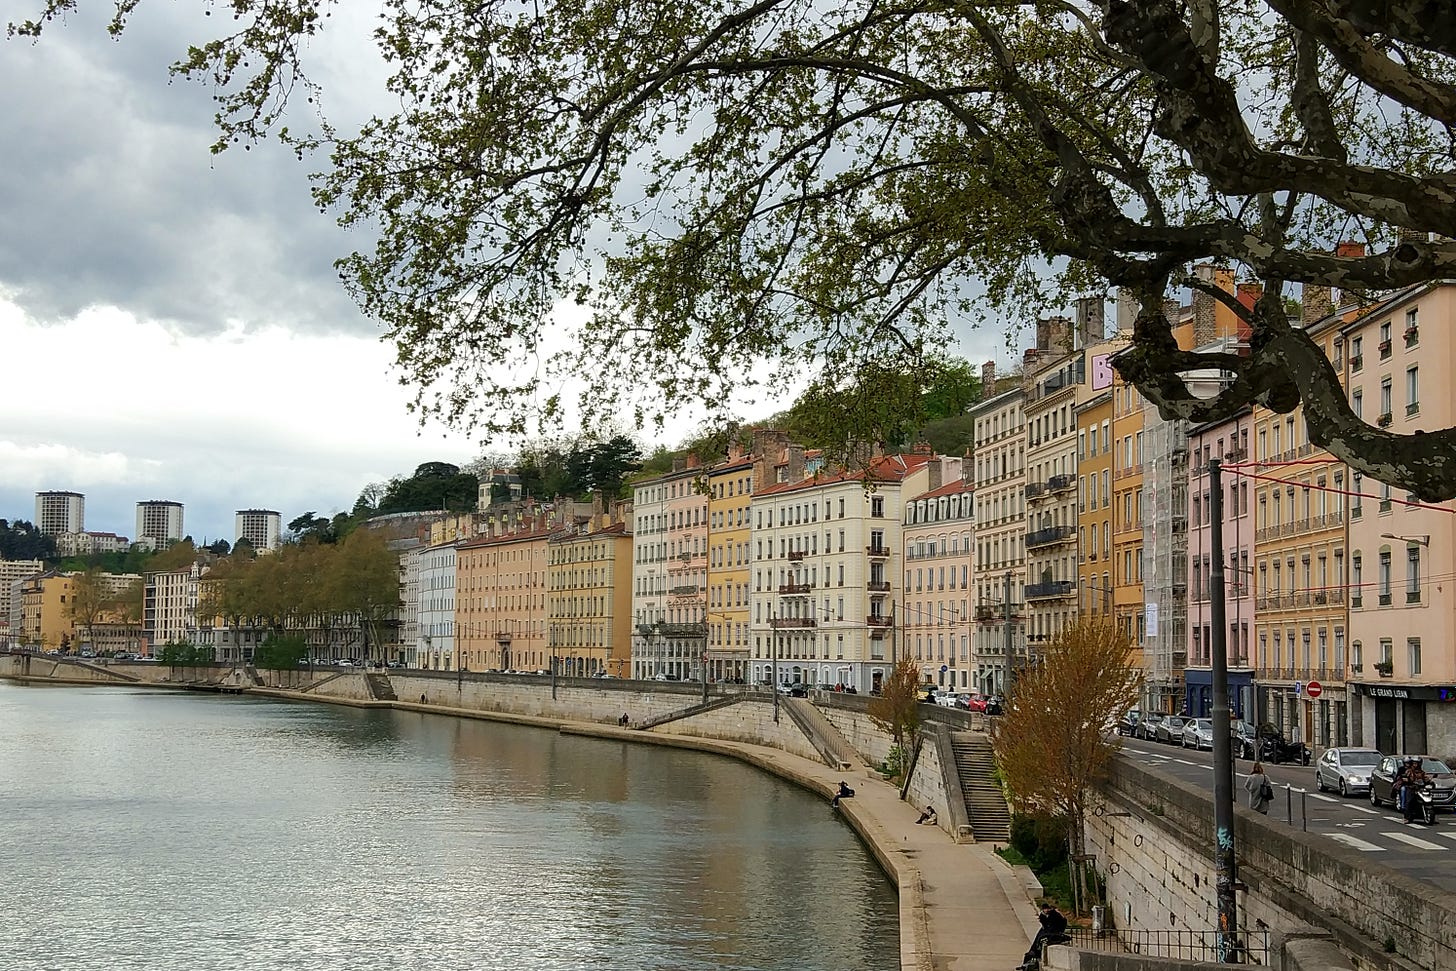 Pastel-toned buildings alongside the Soane river in Lyon, on a cloudy day.